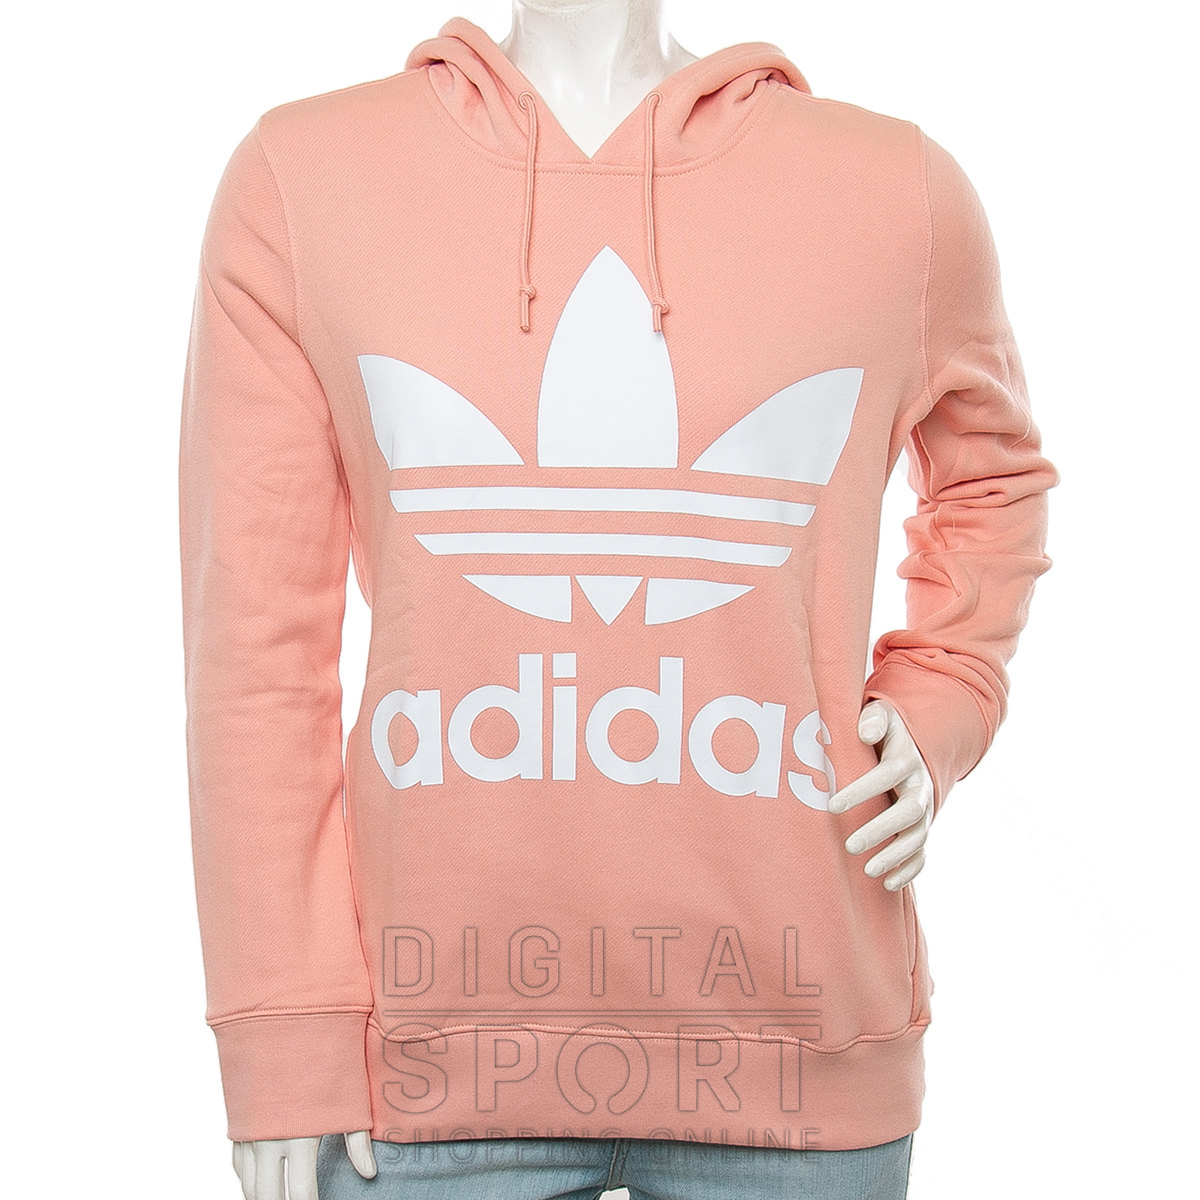 Buzo Adidas Trefoil Mujer Store, 56% OFF | www.kayakerguide.com